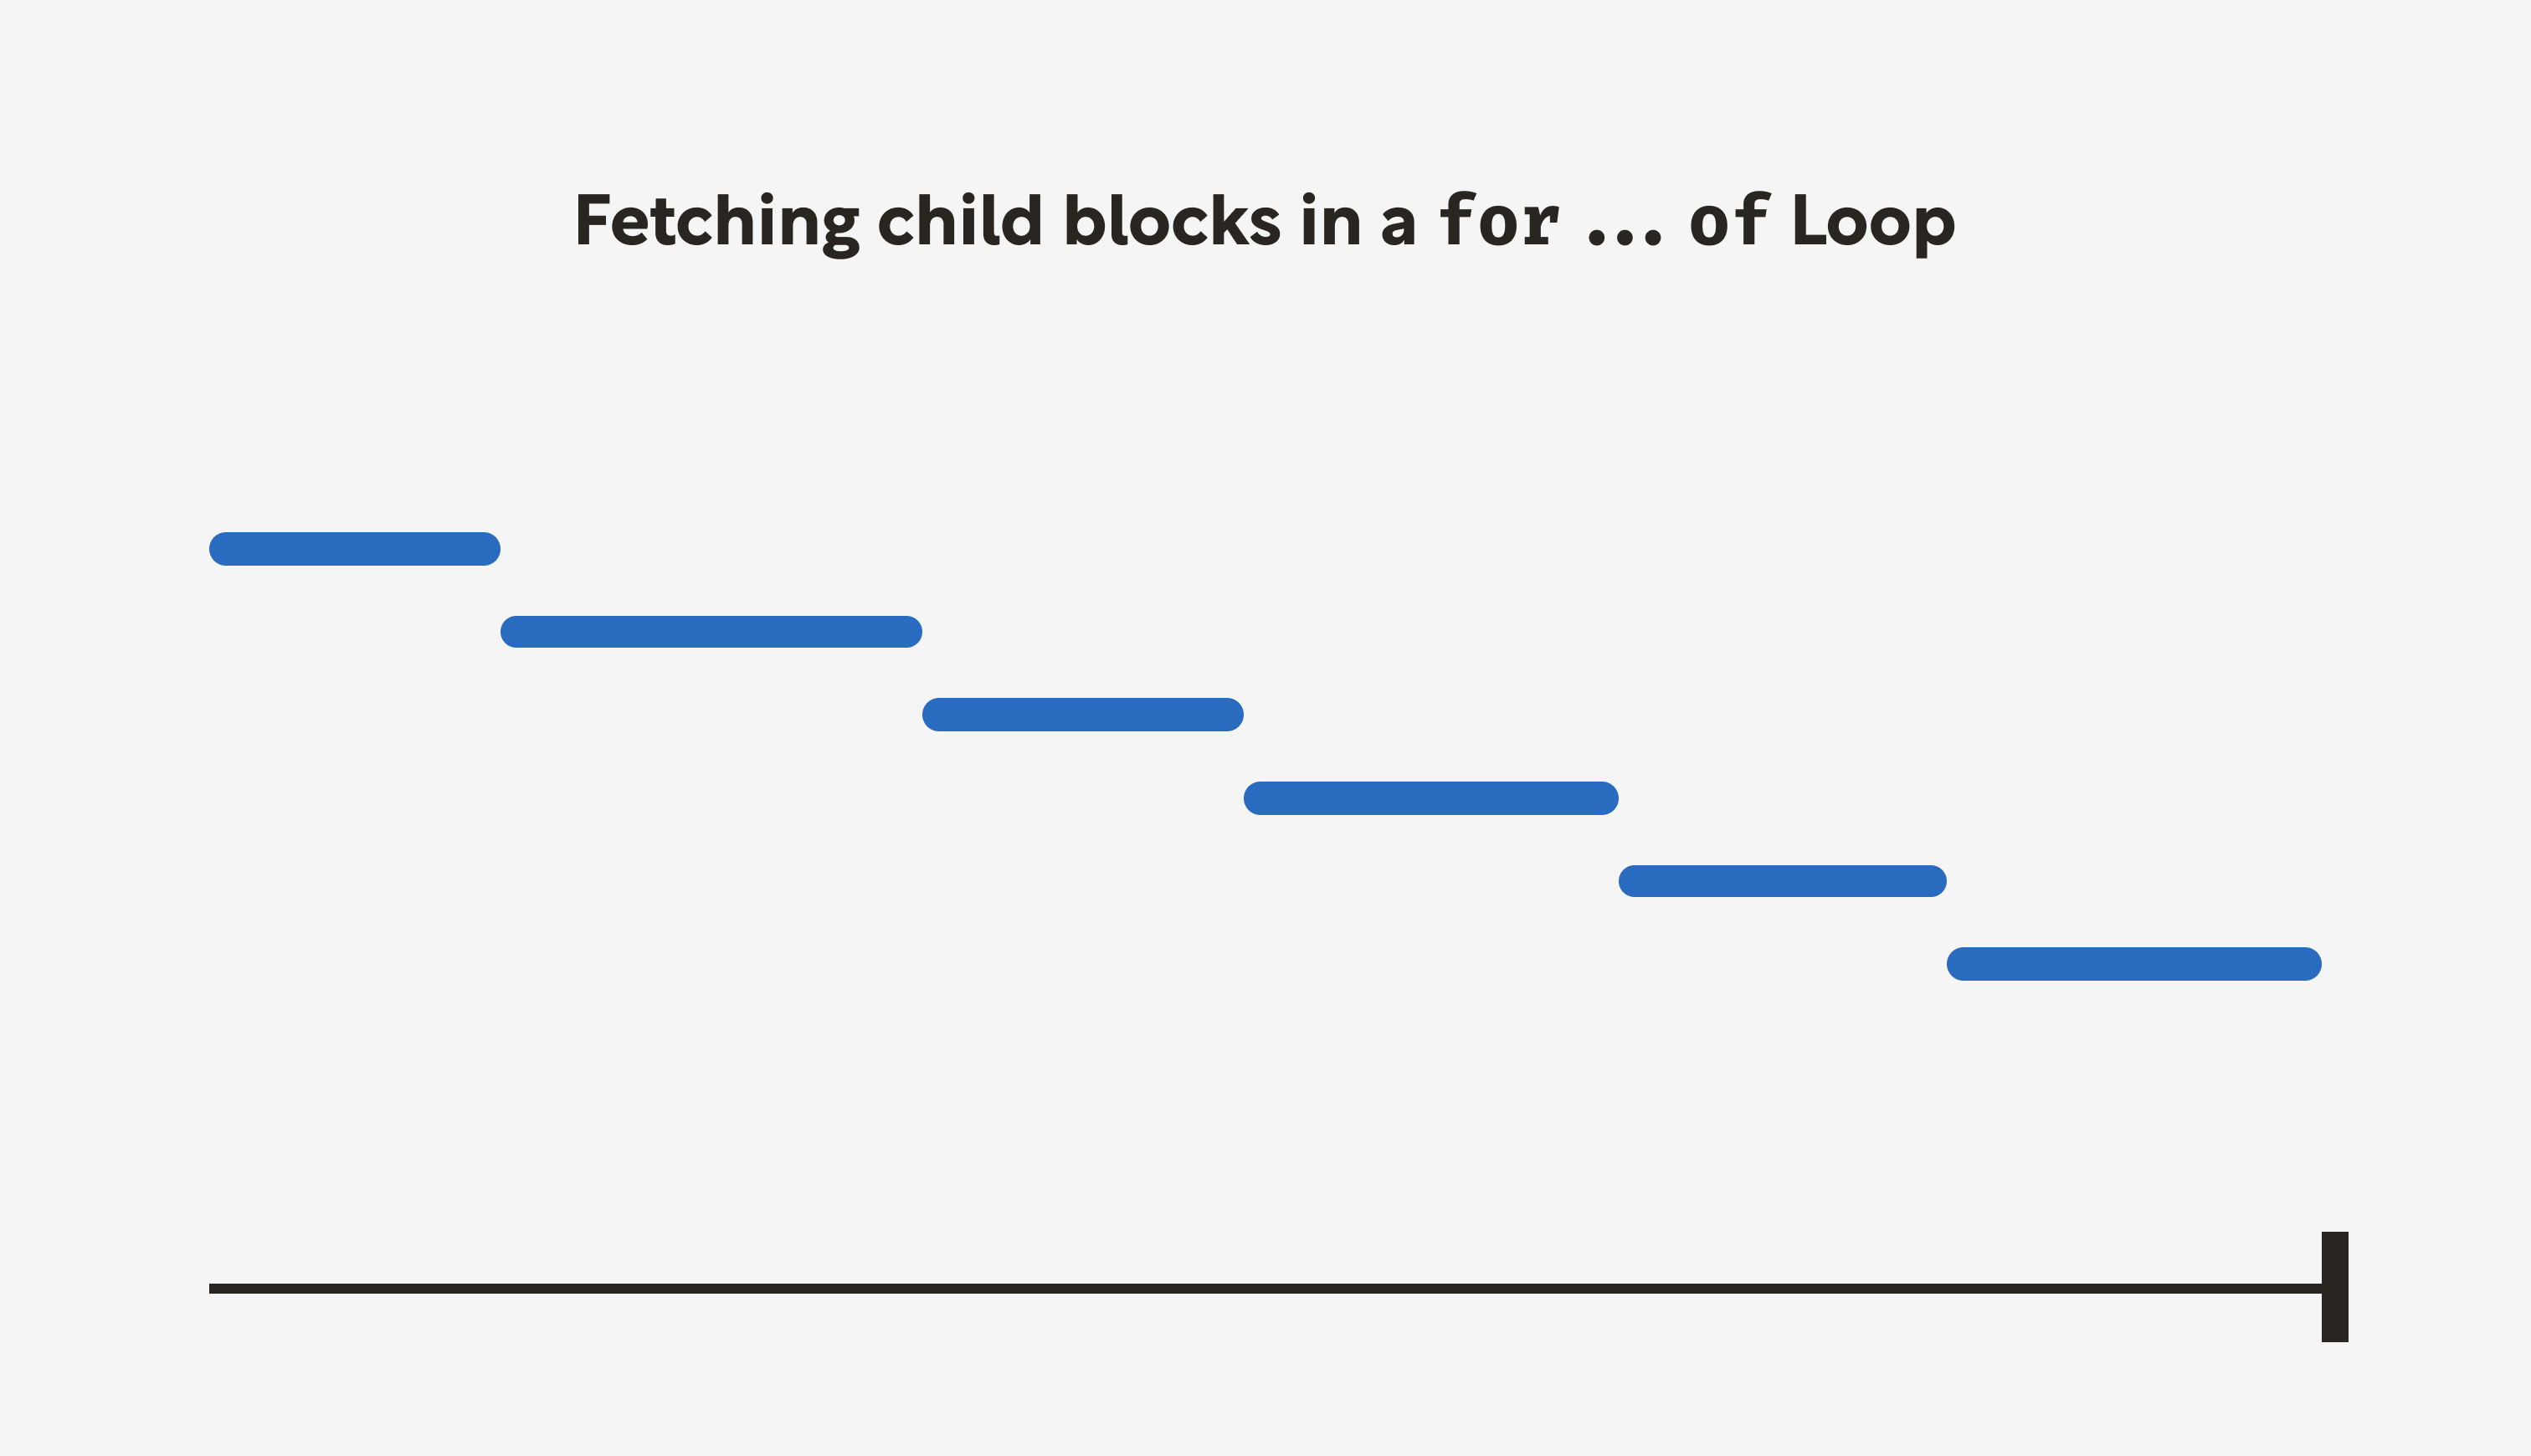 An illustration showing how script execution is paused while waiting for a response from a nested read, resulting in a long execution time.